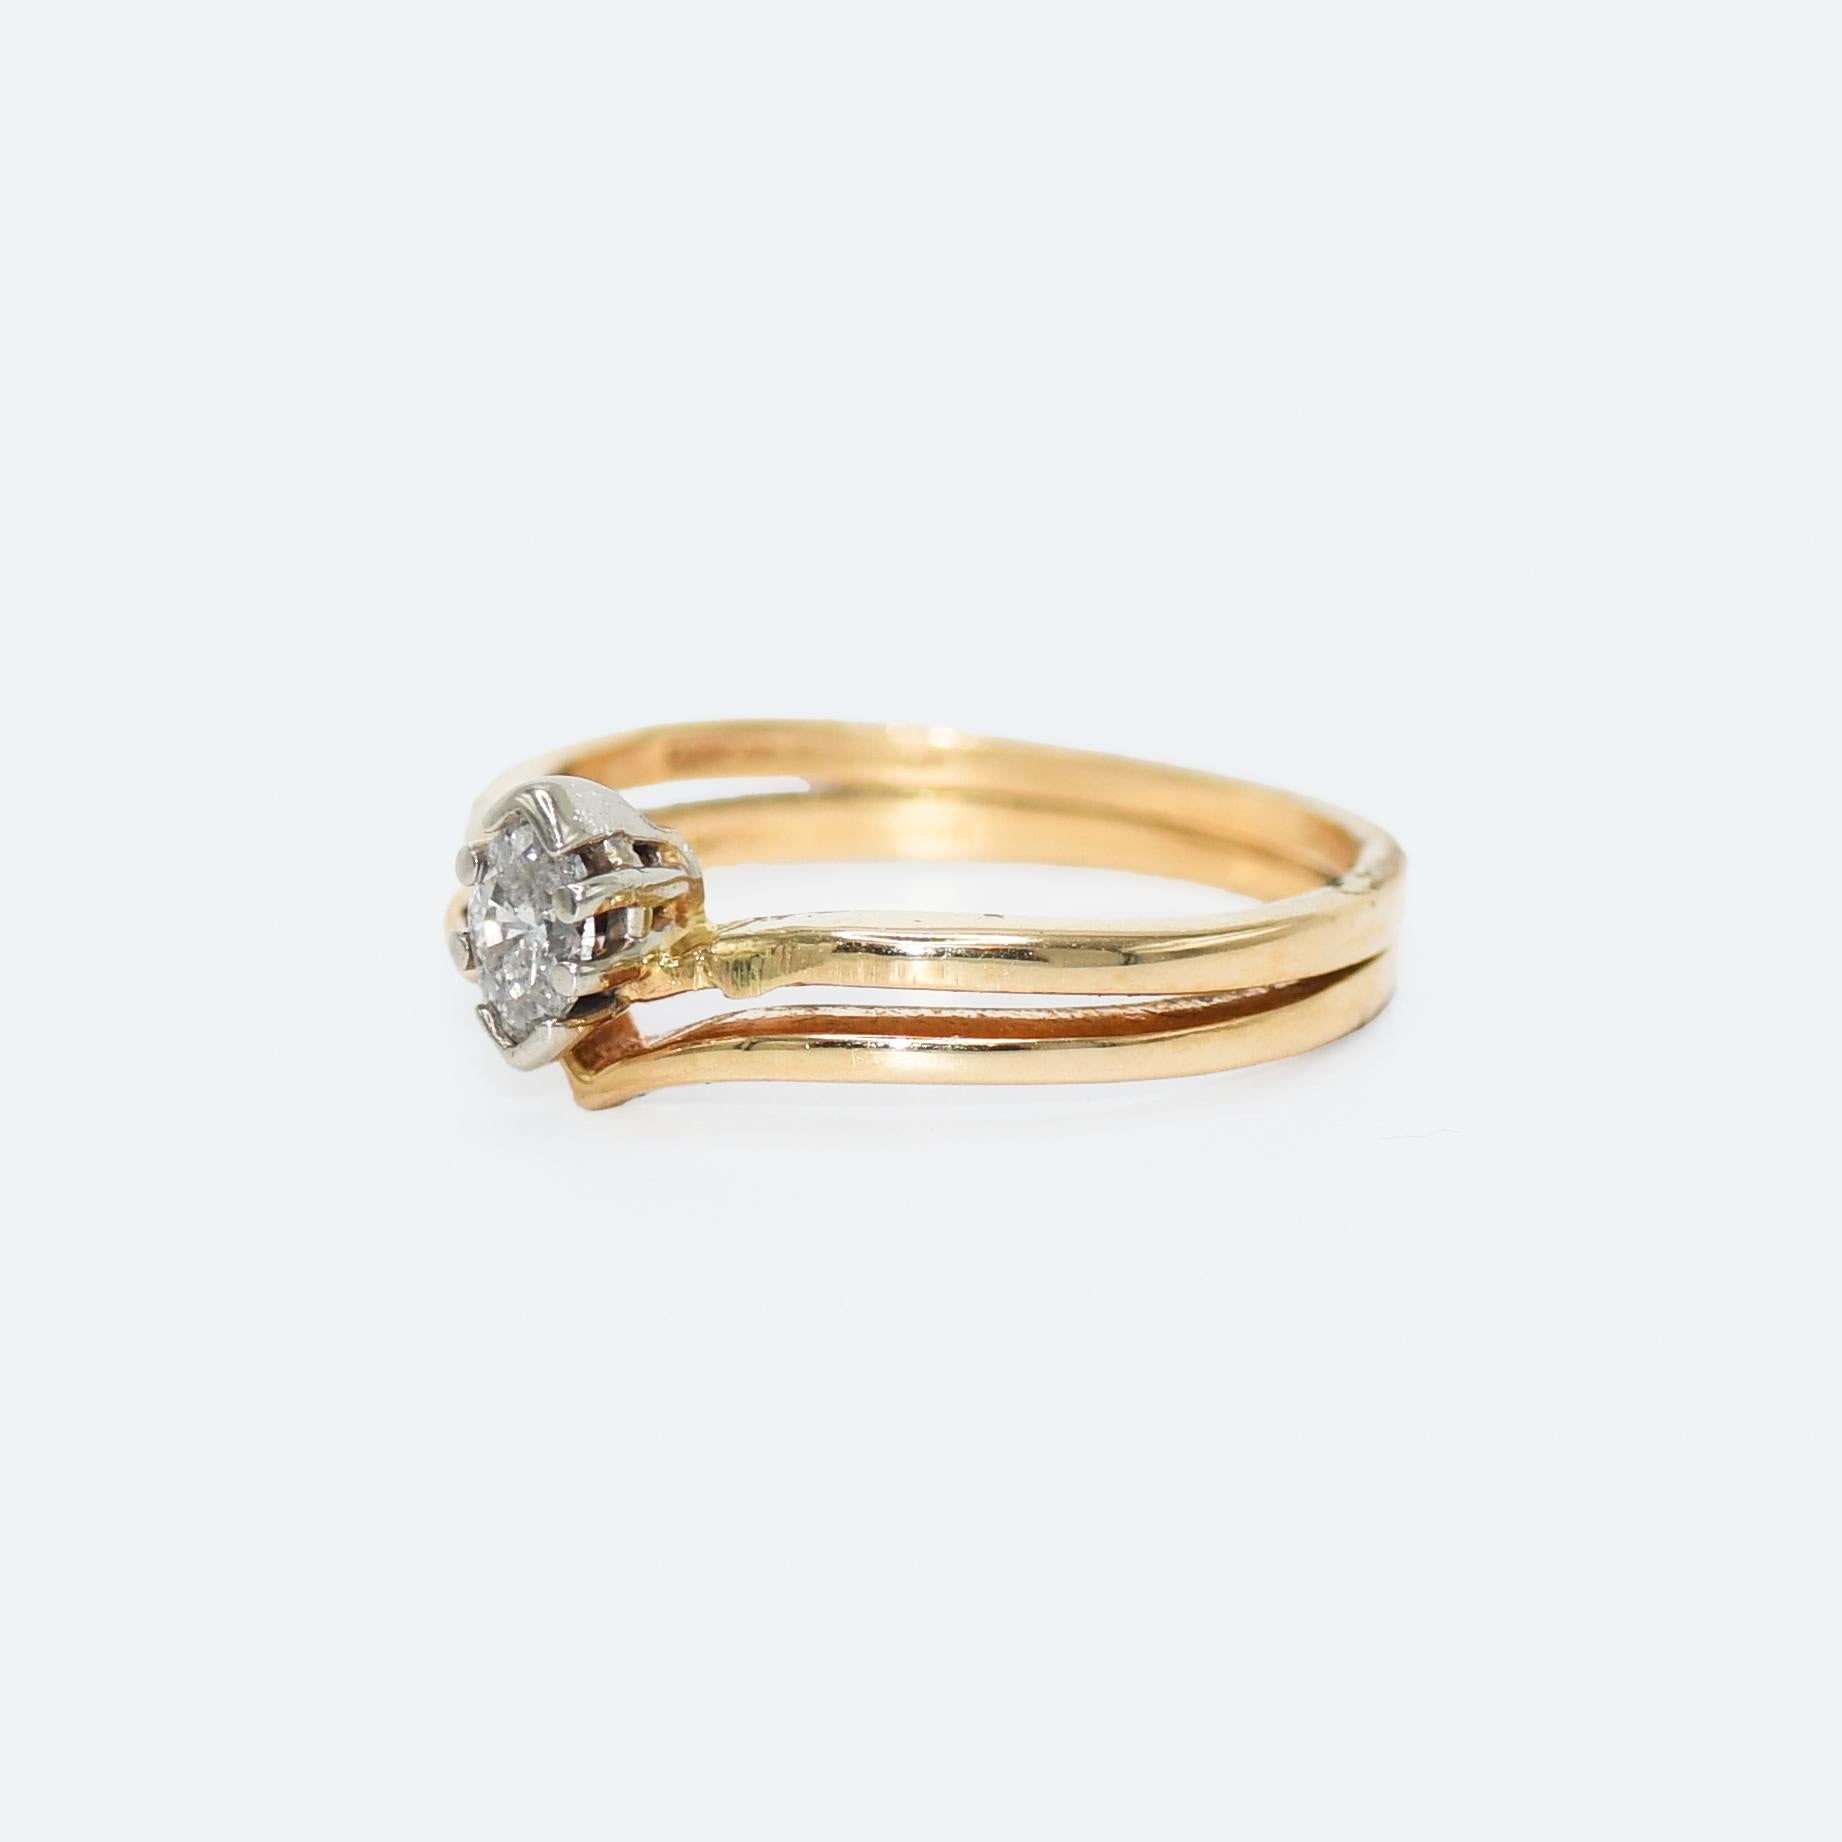 14k Yellow Gold Marquise Shaped Diamond Ring, H Color SI Clarity, Size 6.75 For Sale 2